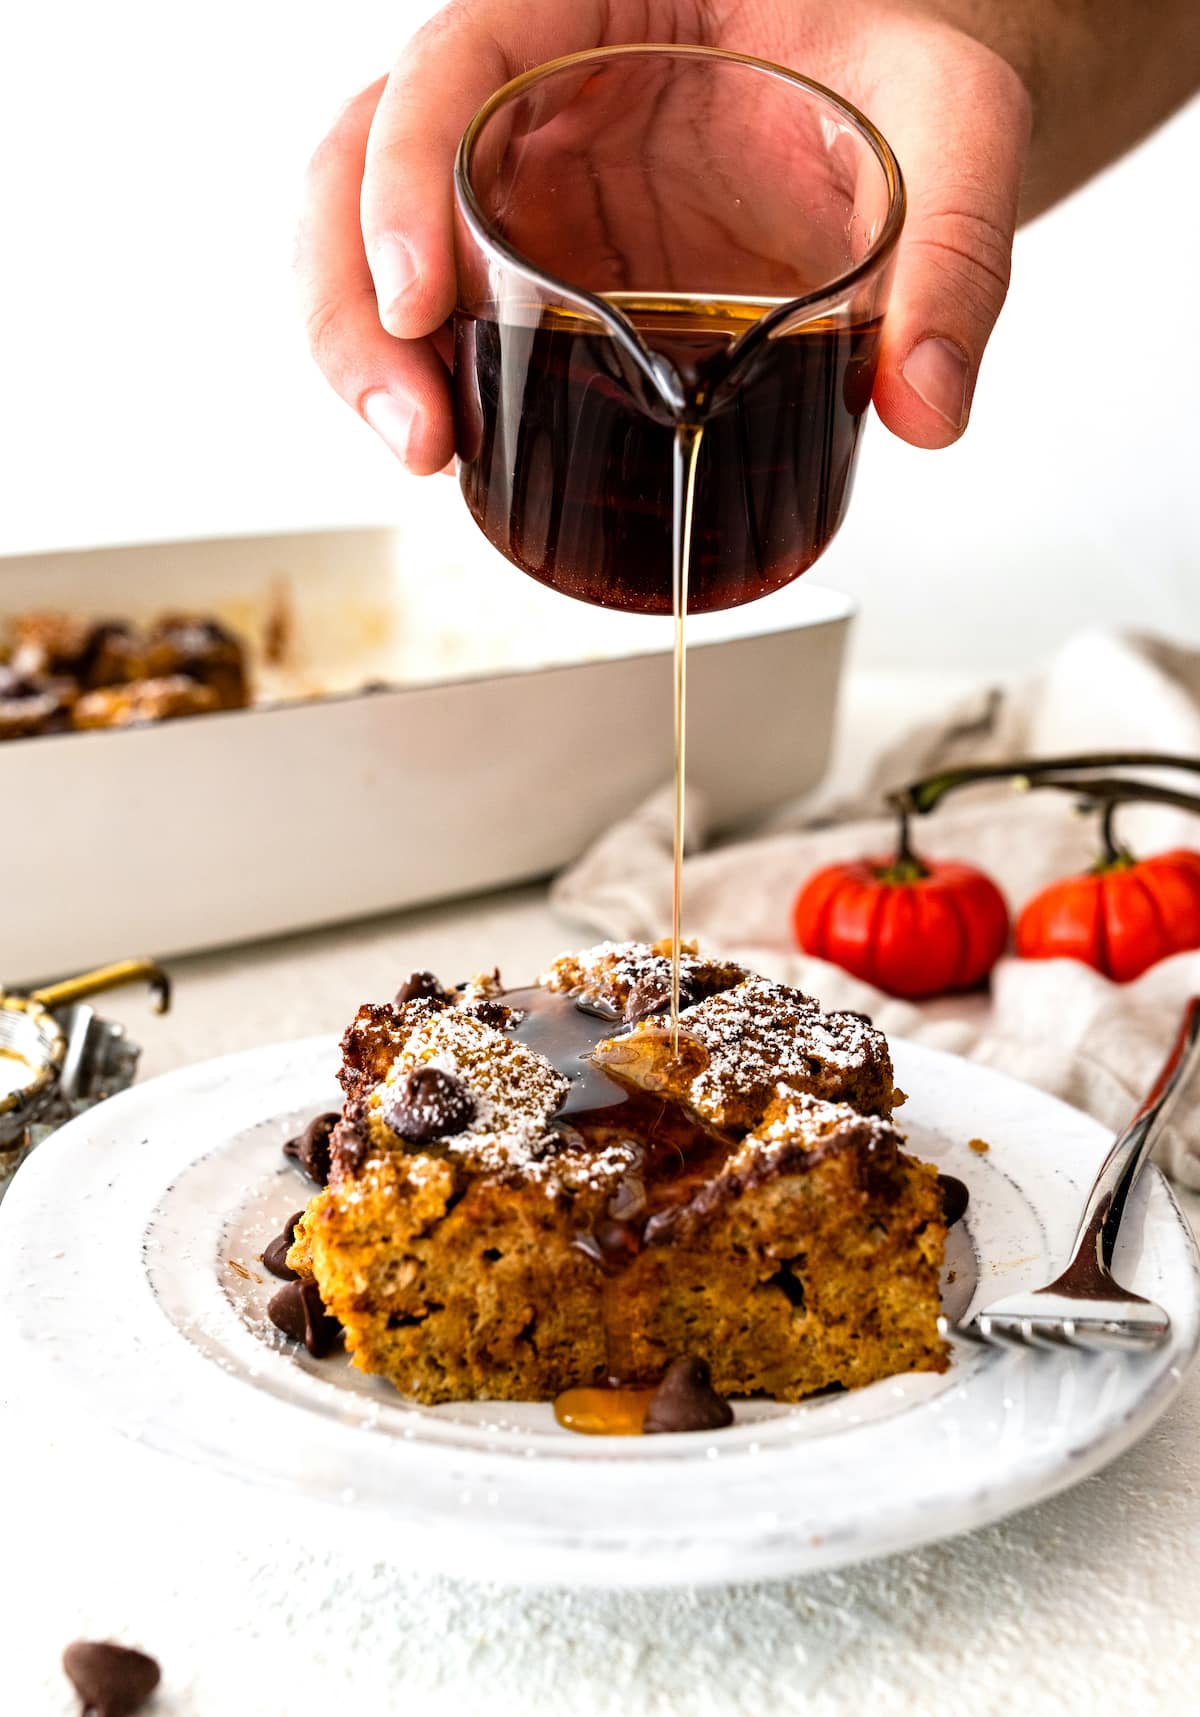 Maple syrup being poured over a piece of Pumpkin French Toast Casserole on a small plate.